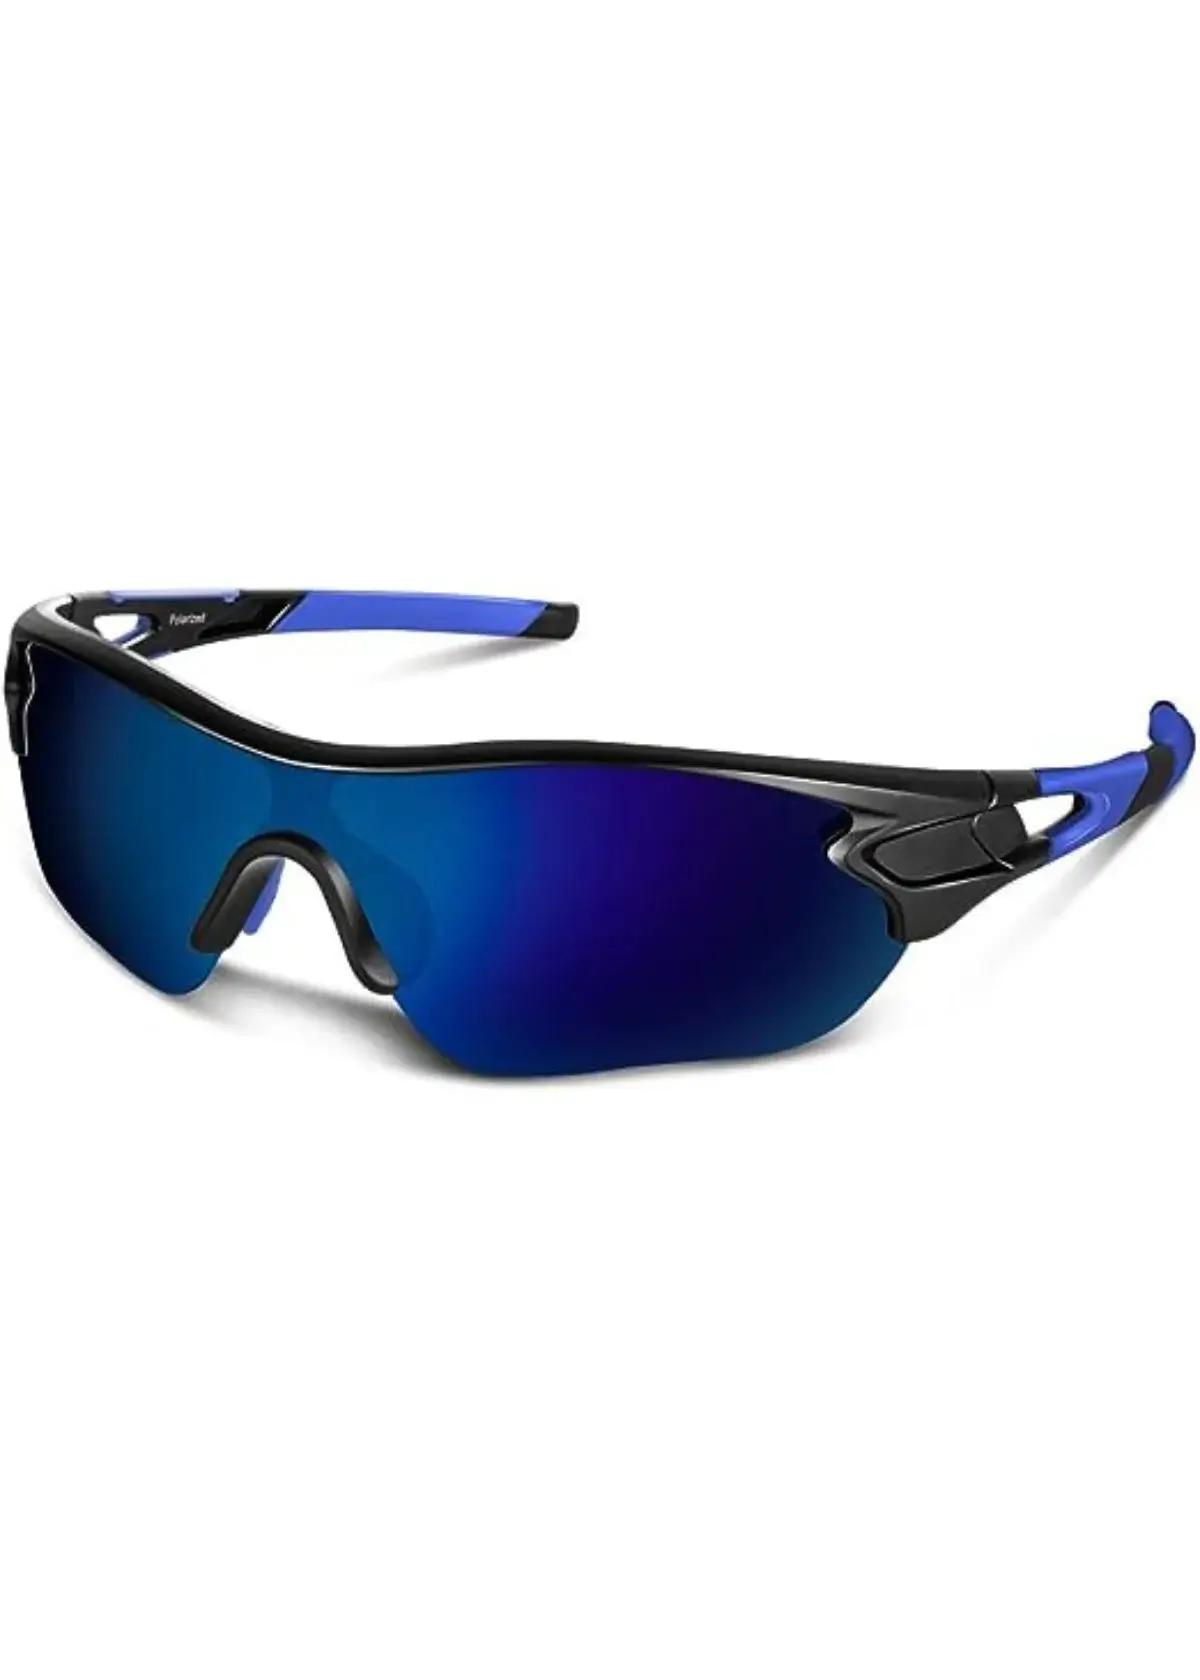 How to choose the right baseball sunglasses?